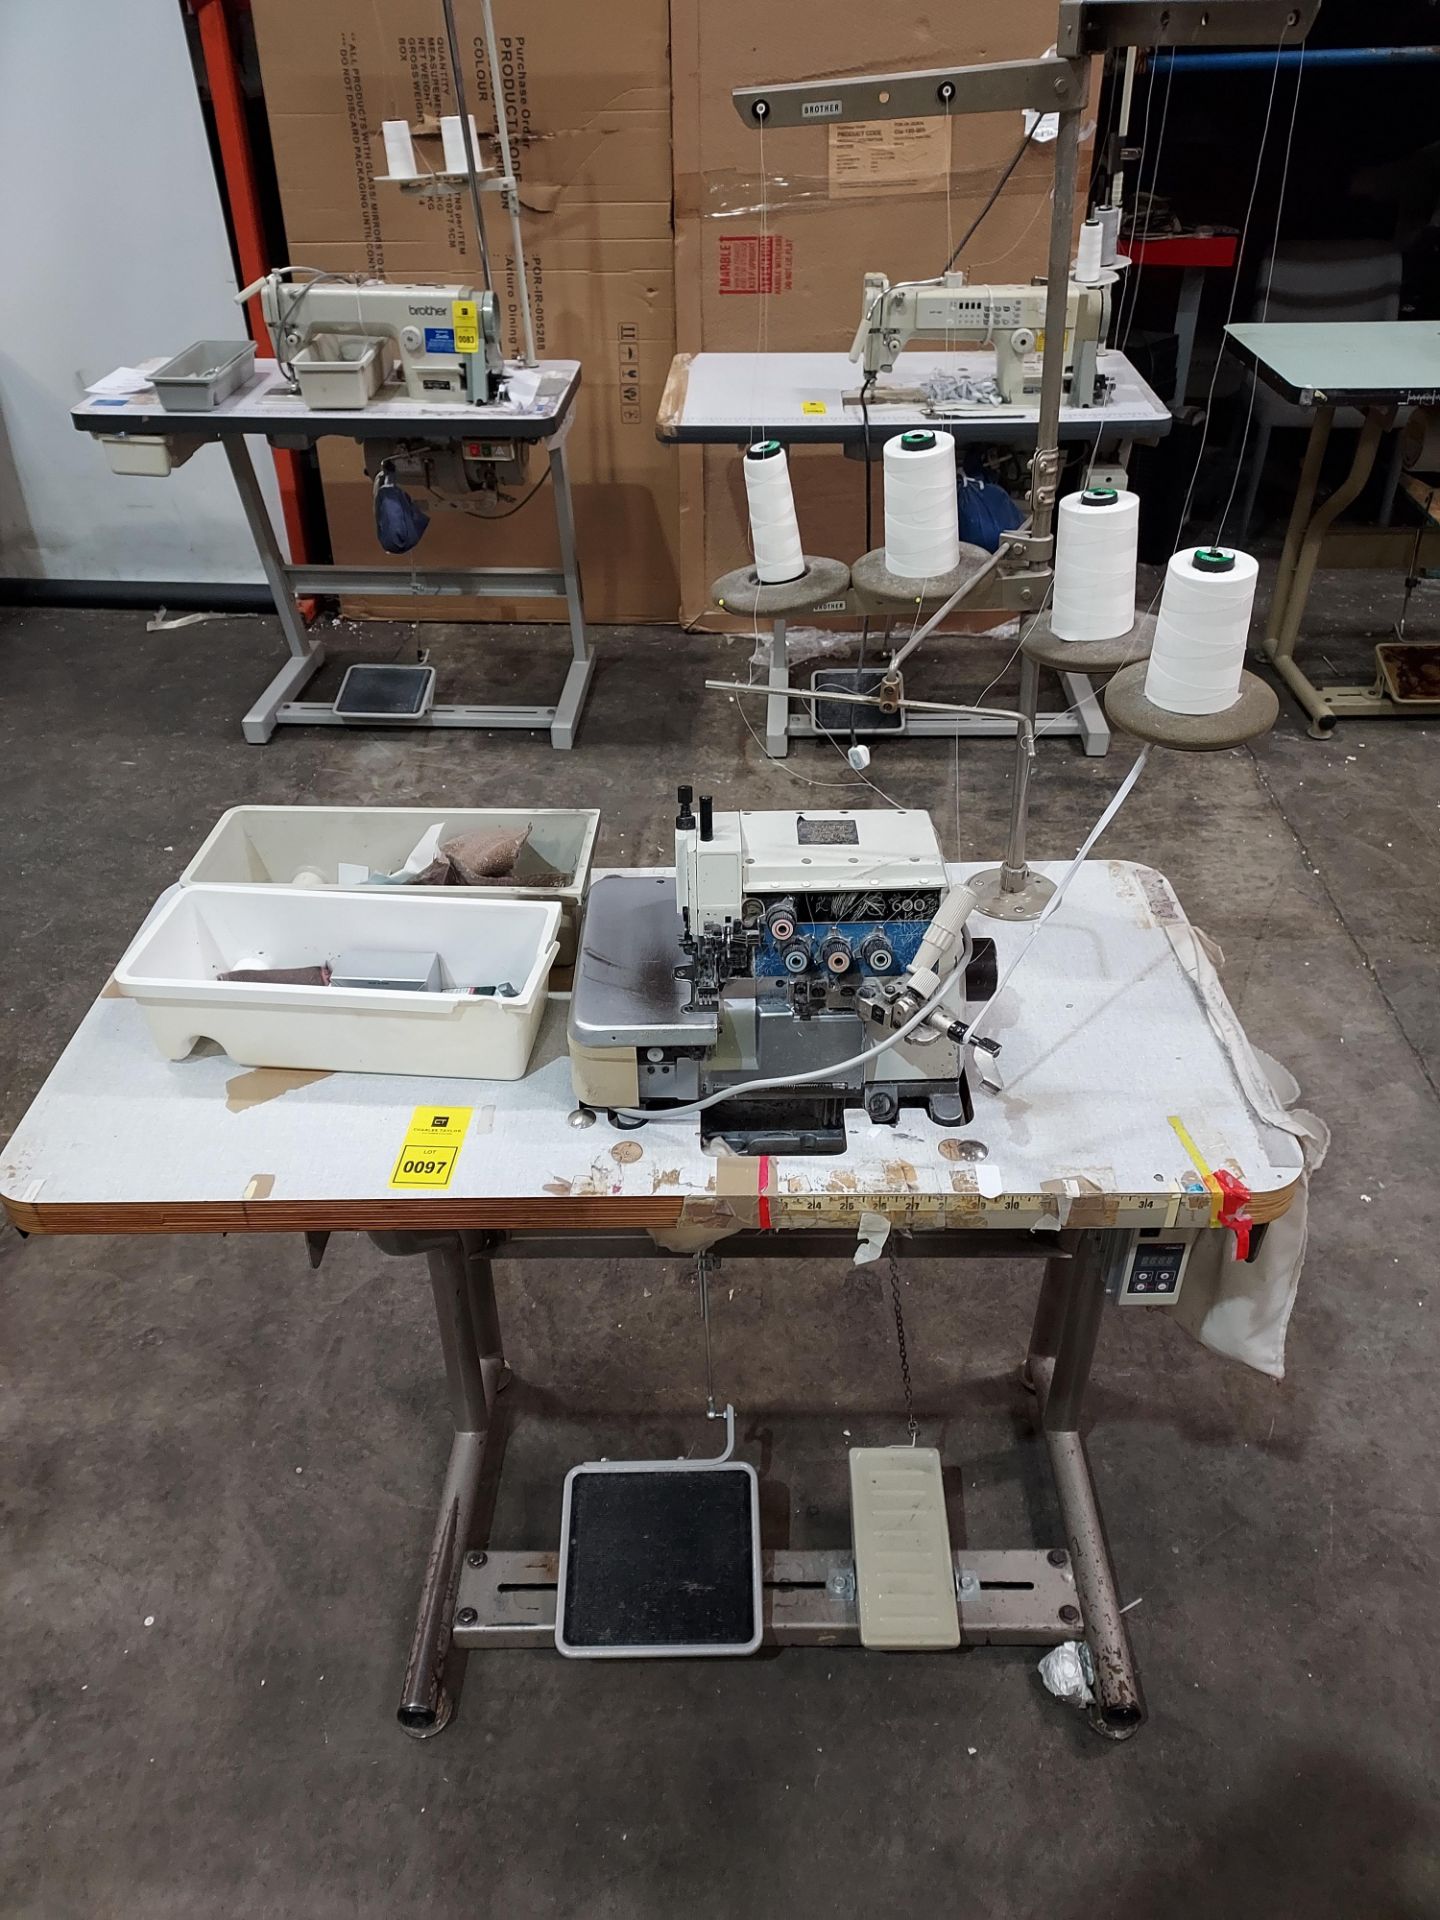 1 X BROTHER ( 600) INDUSTRIAL 4 THREAD OVERLOCKER SEWING MACHINE - WITH FOOT PEDAL AND TABLE